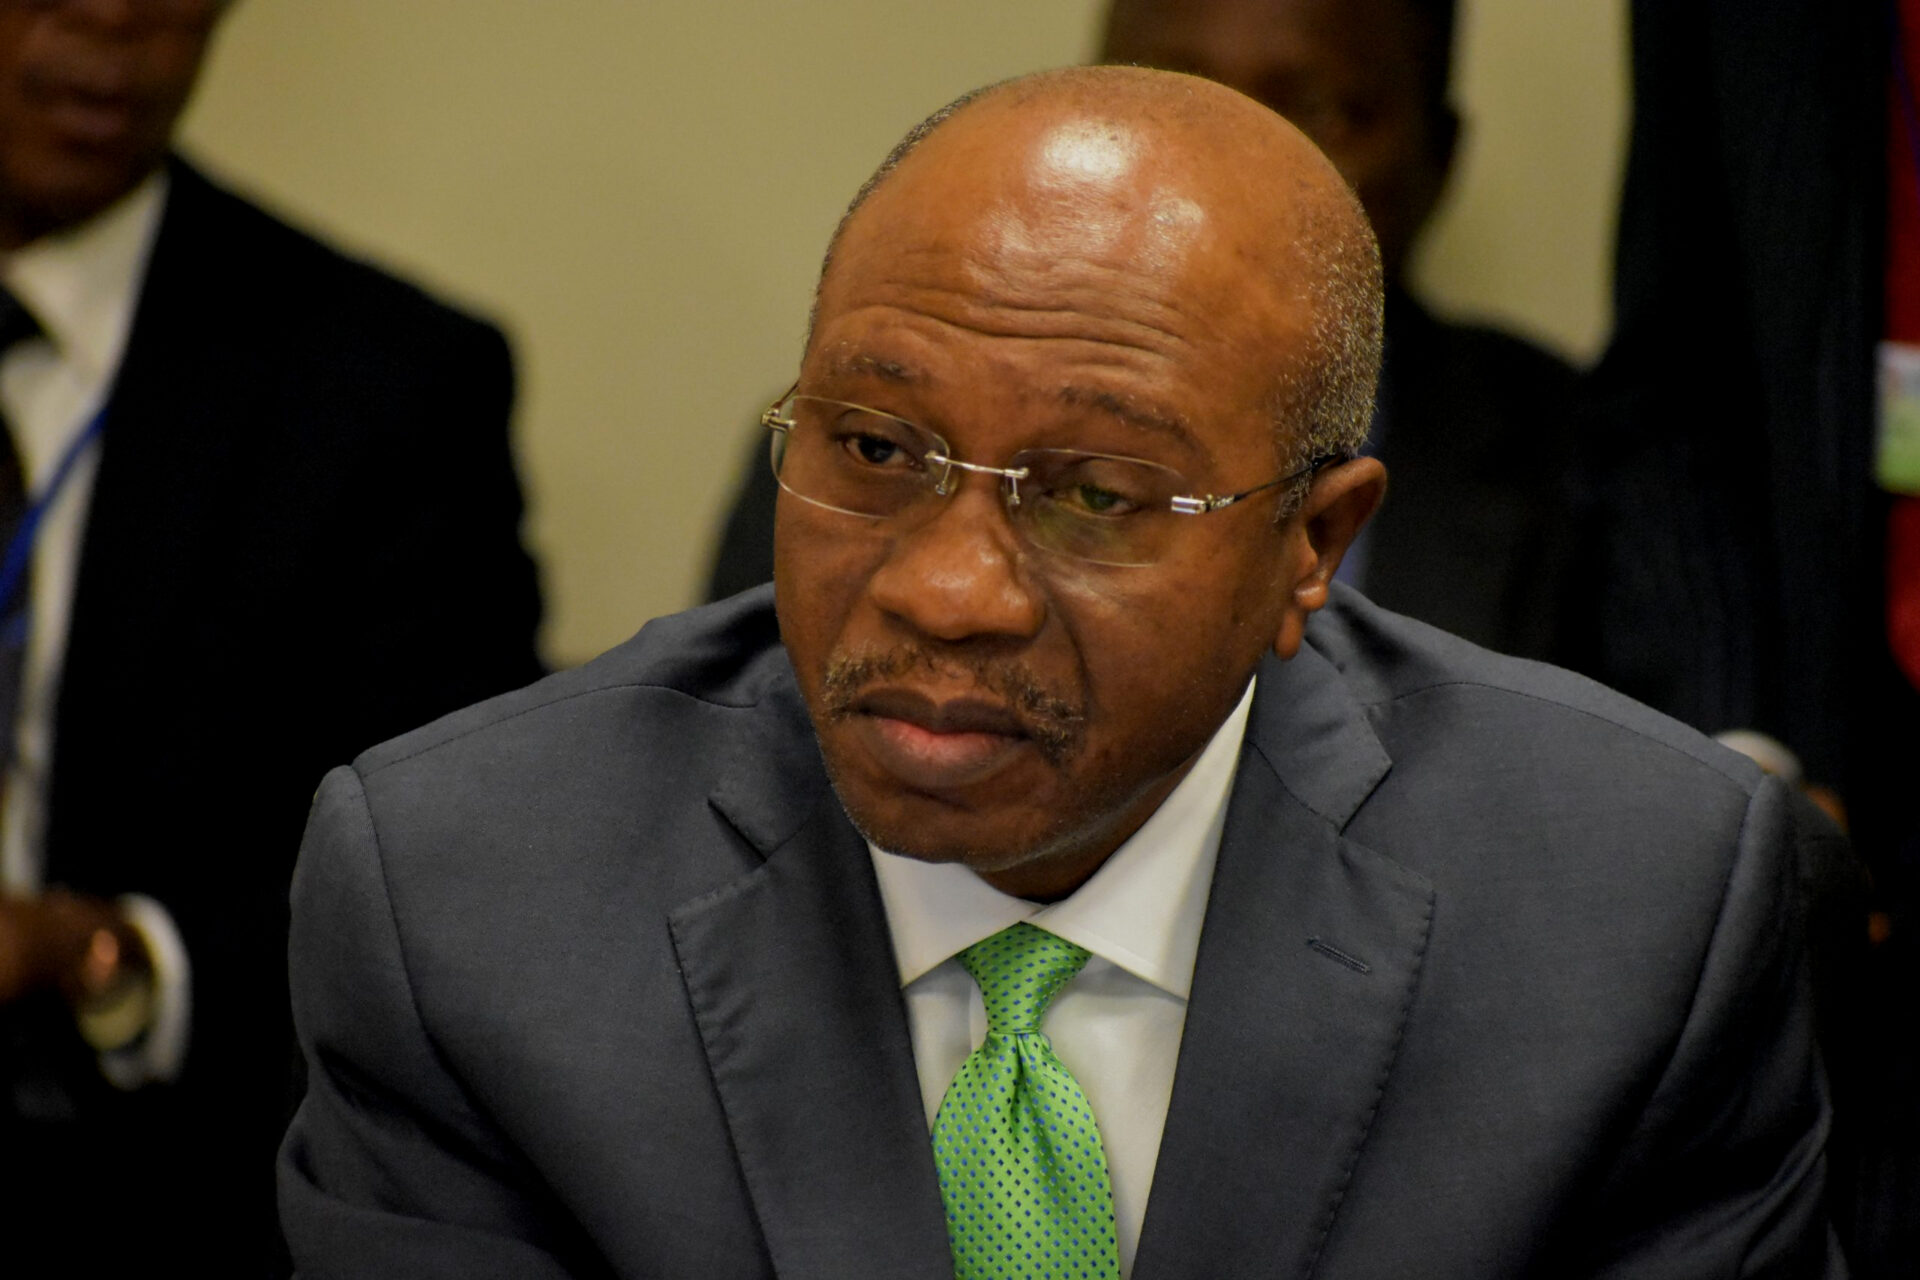 [GIST] Central Bank Governor, Emefiele’s Comment That 'Nigerians Can Have Heart Attack' Is Reckless, Unpardonable – Opposition Party, PDP